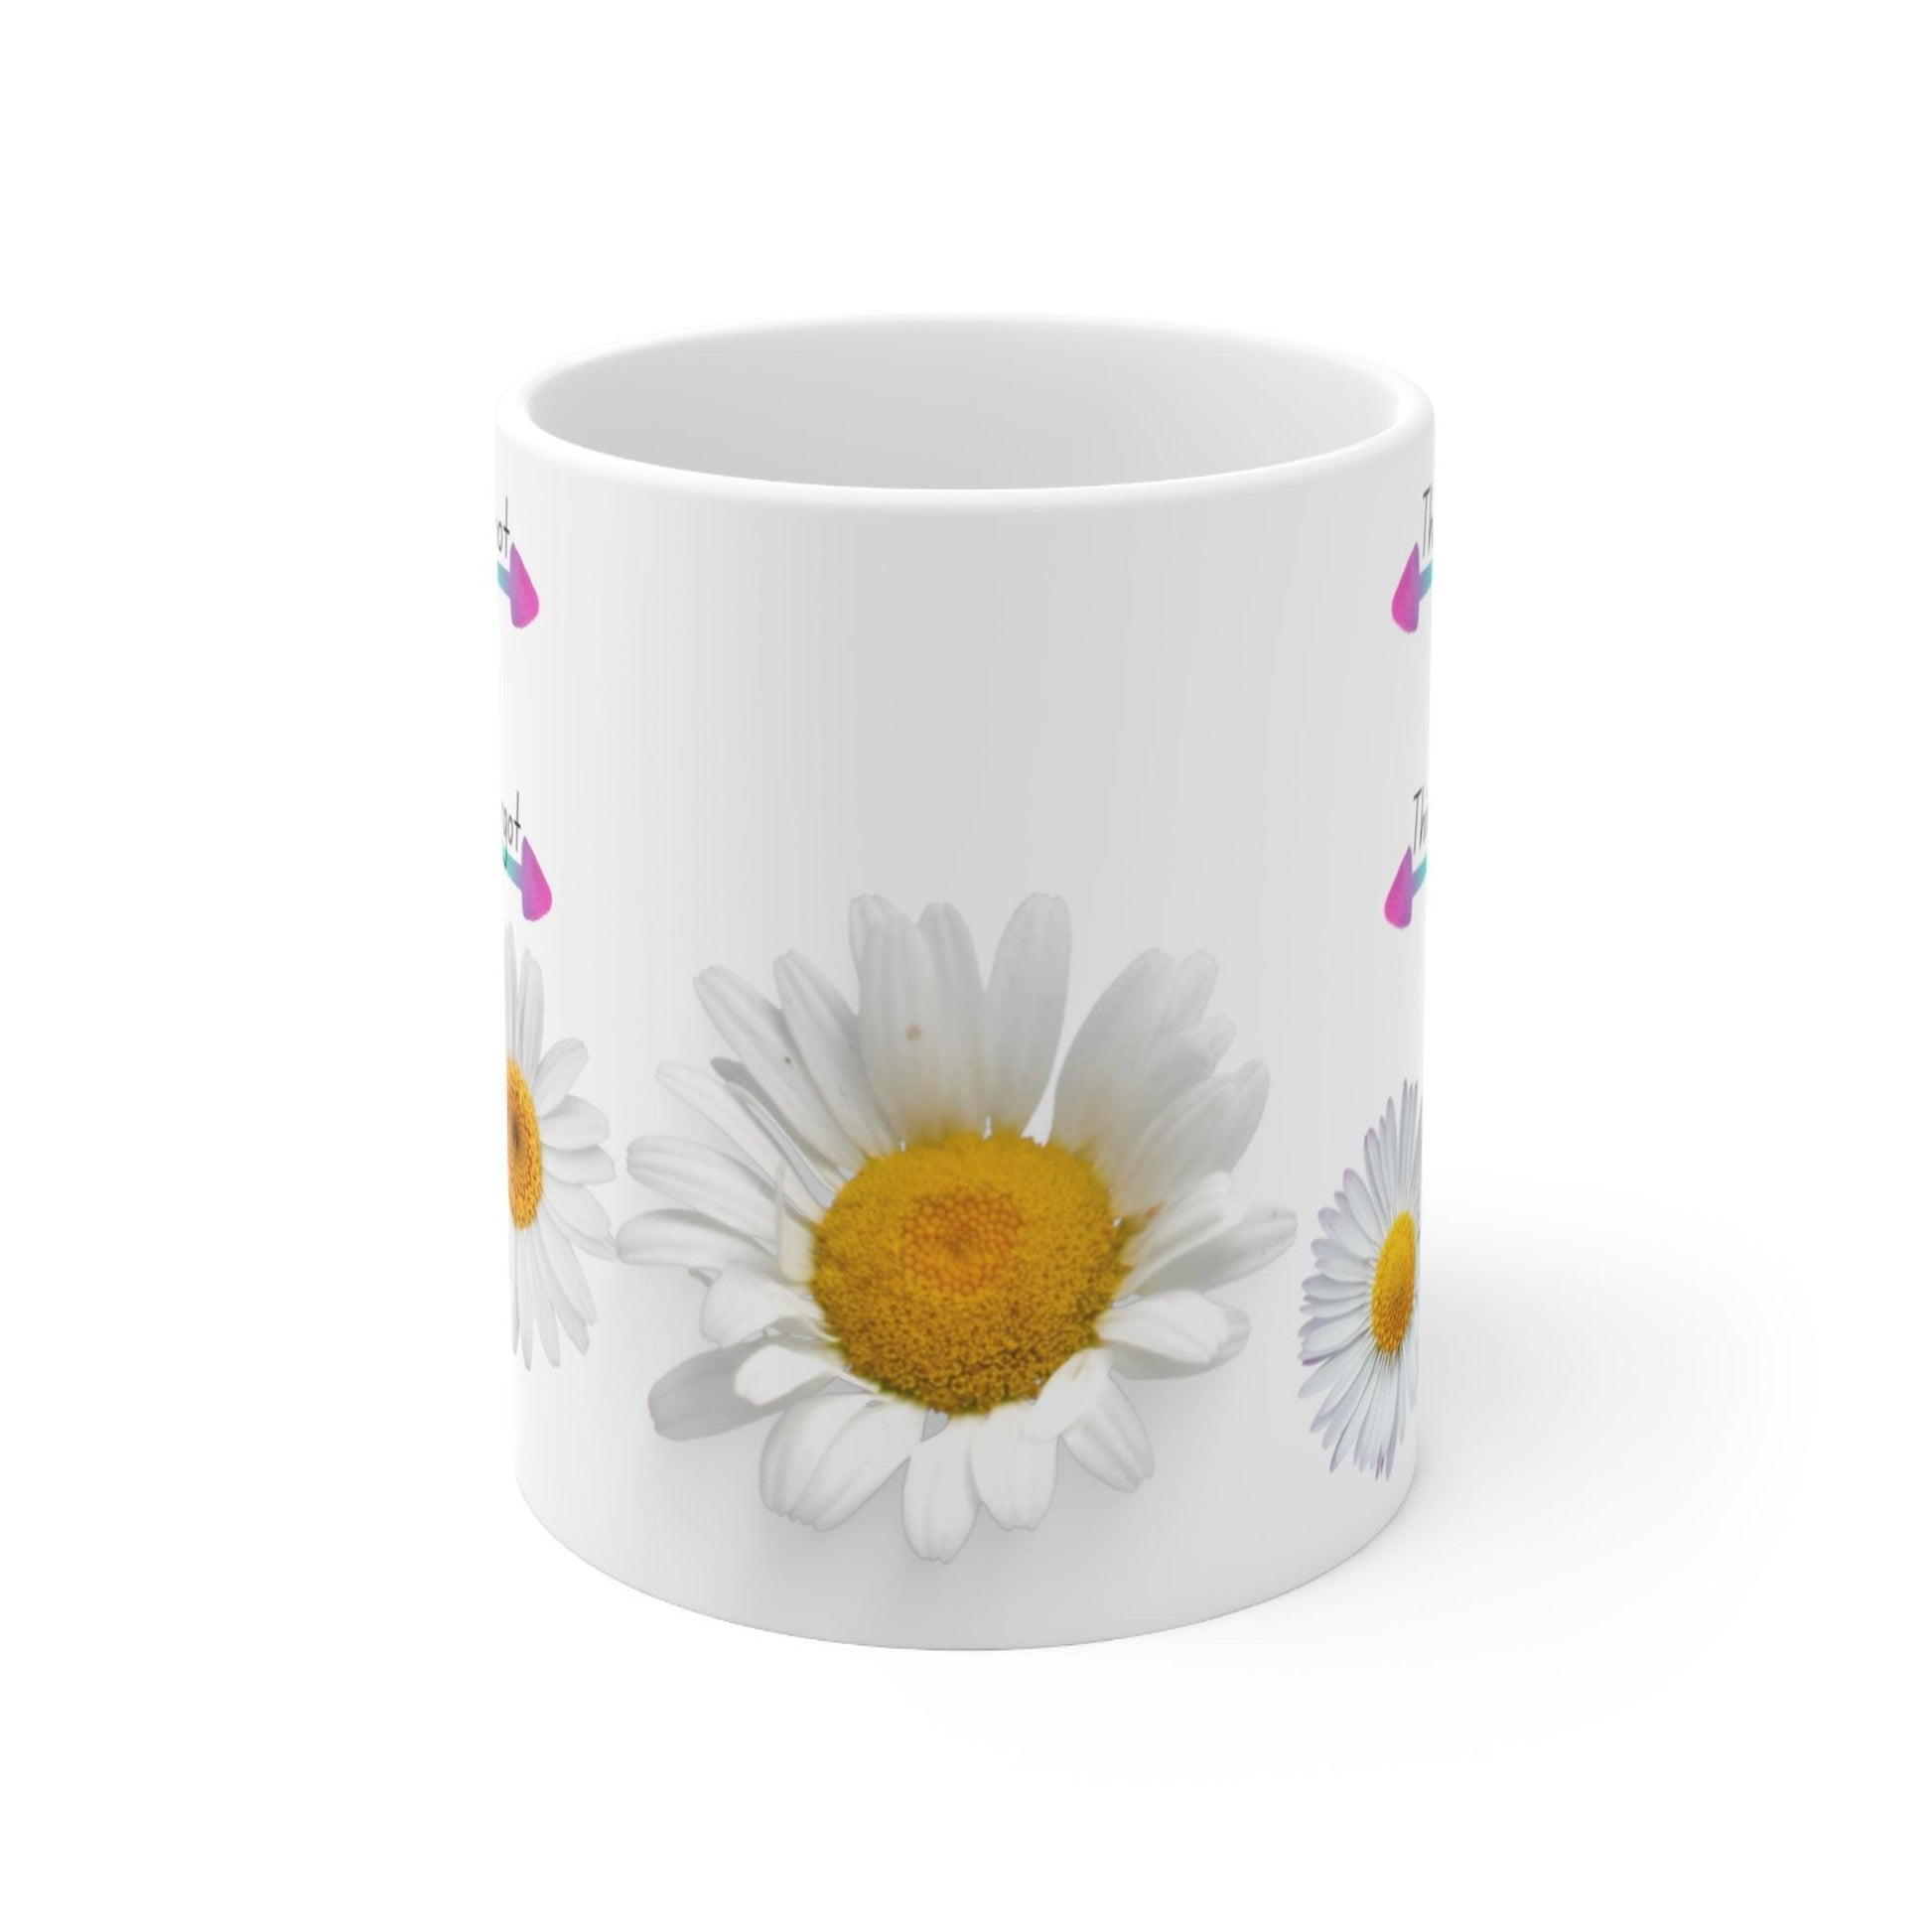 Whoopsie Daisy Memory Mug - Fun & Playful Reminder Coffee Cup - Fidget and Focus